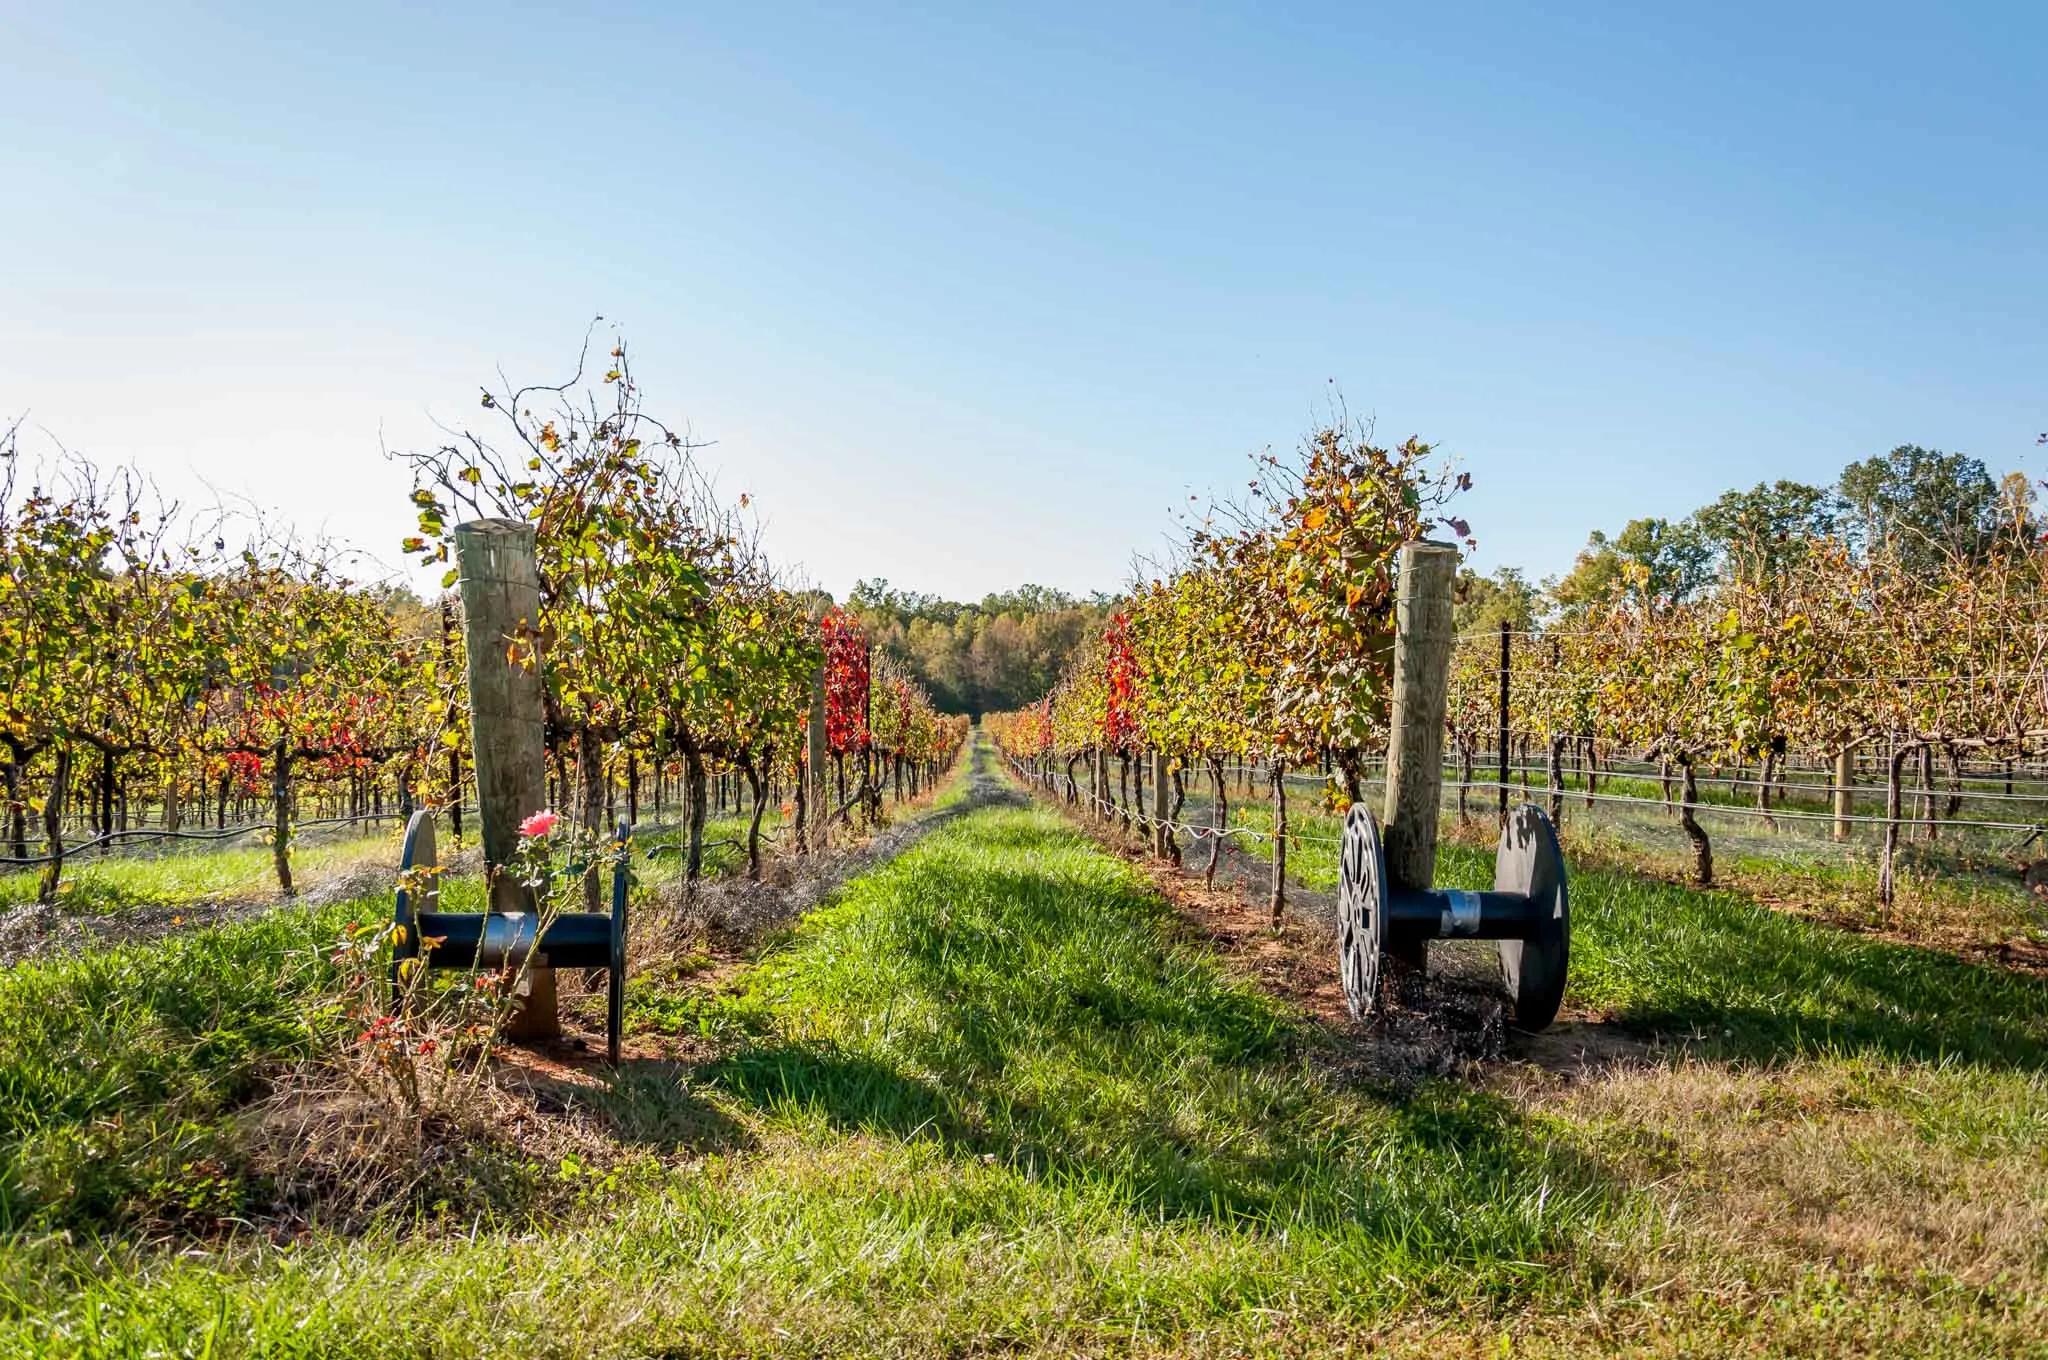 Grapevines in a vineyard with leaves changing for the fall